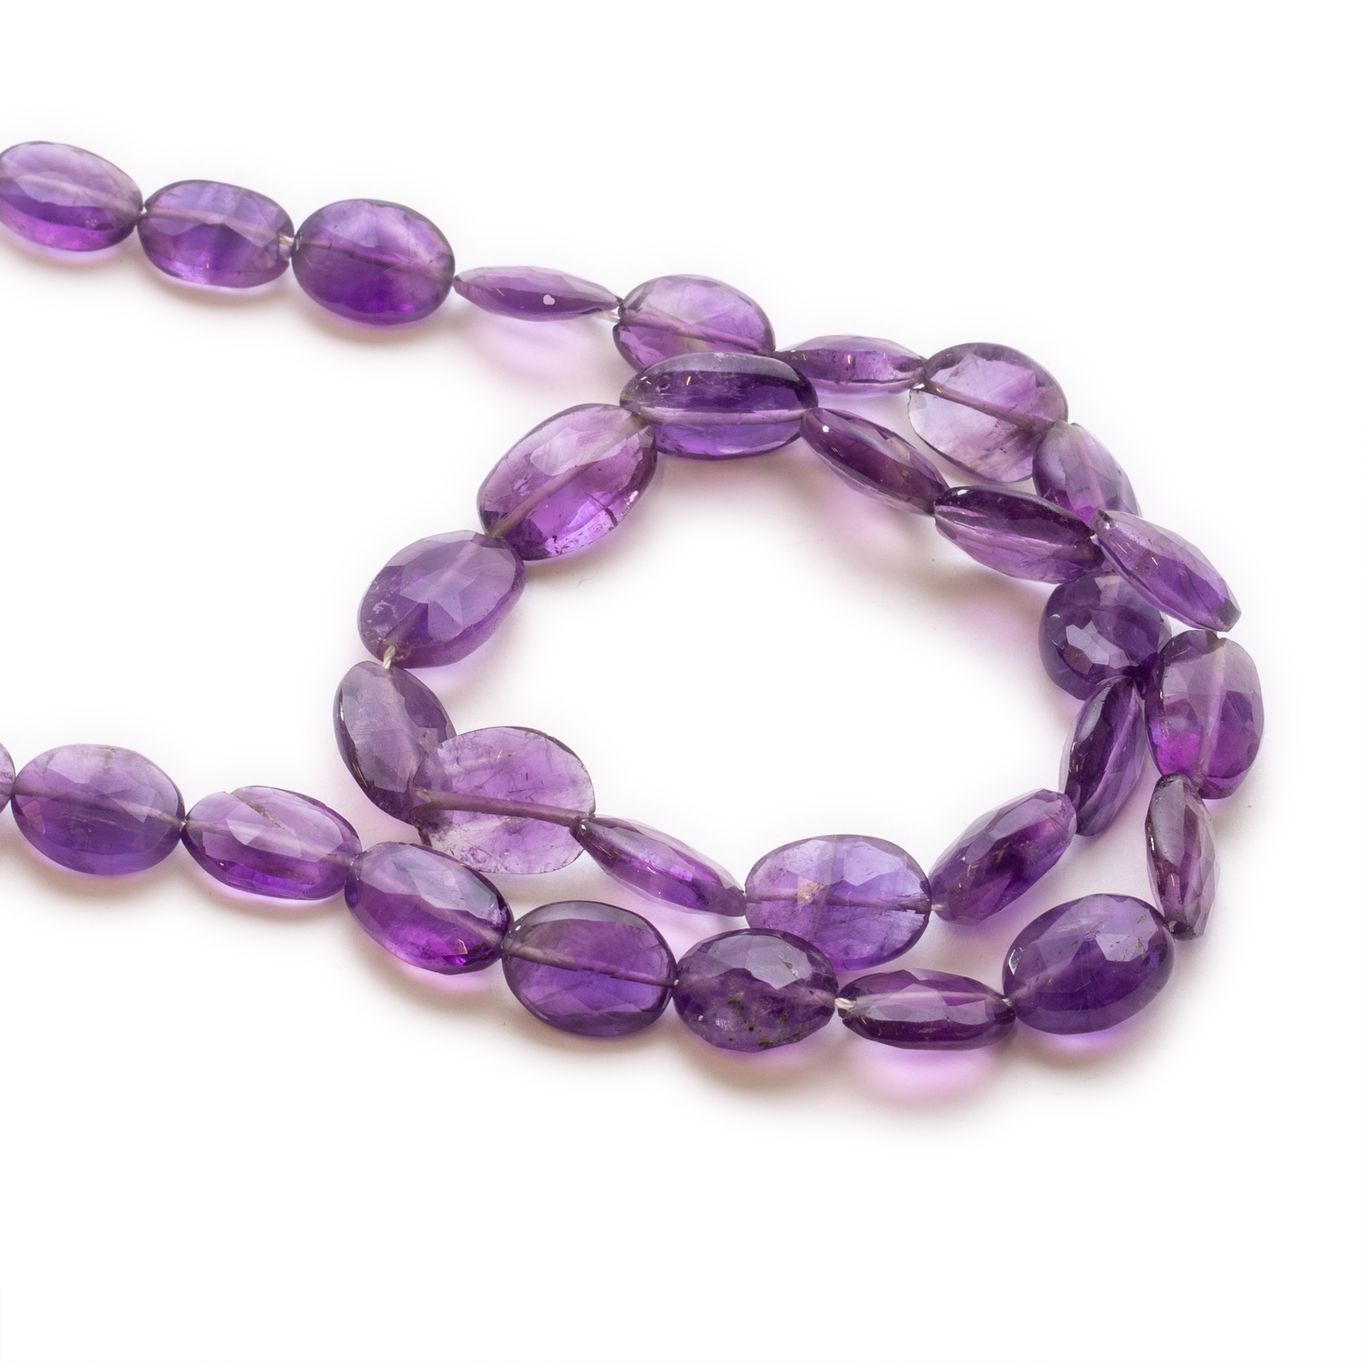 Amethyst Faceted Oval Beads - Approx 10x8mm